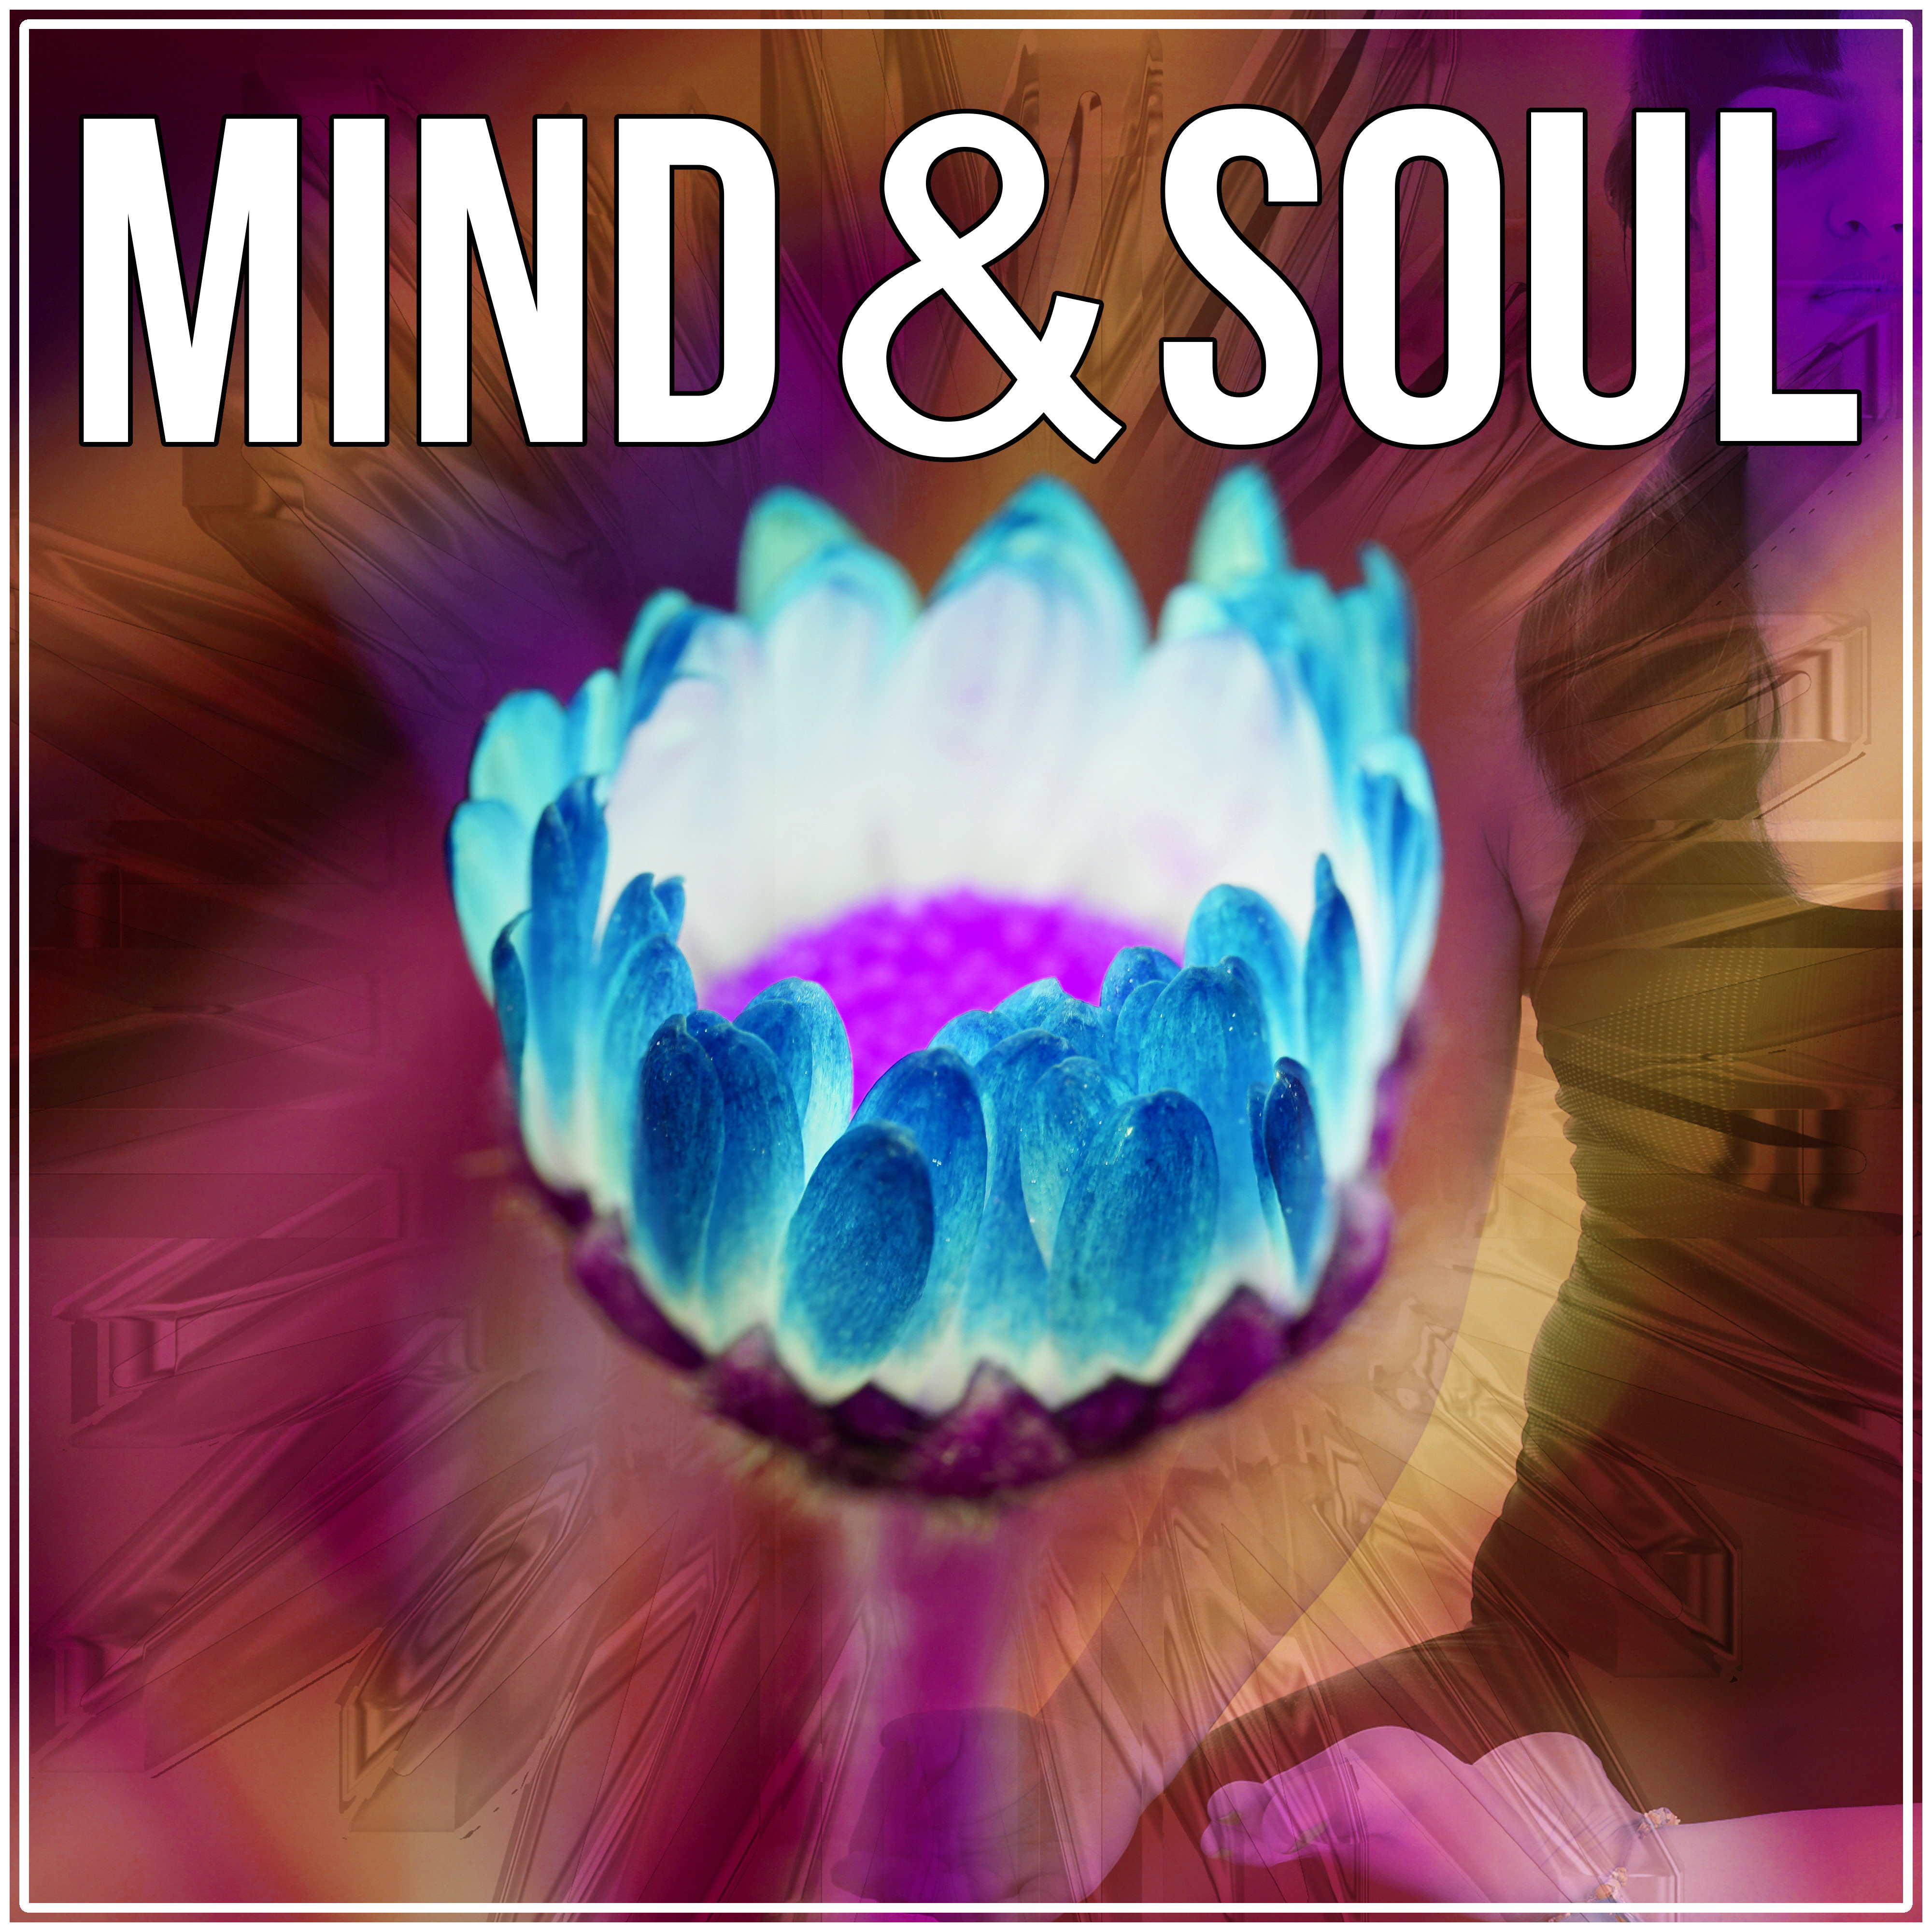 Mind & Soul - Yoga Exercises, Relaxing Songs for Mindfulness Meditation, Quiet Morning, Guided Imagery Music